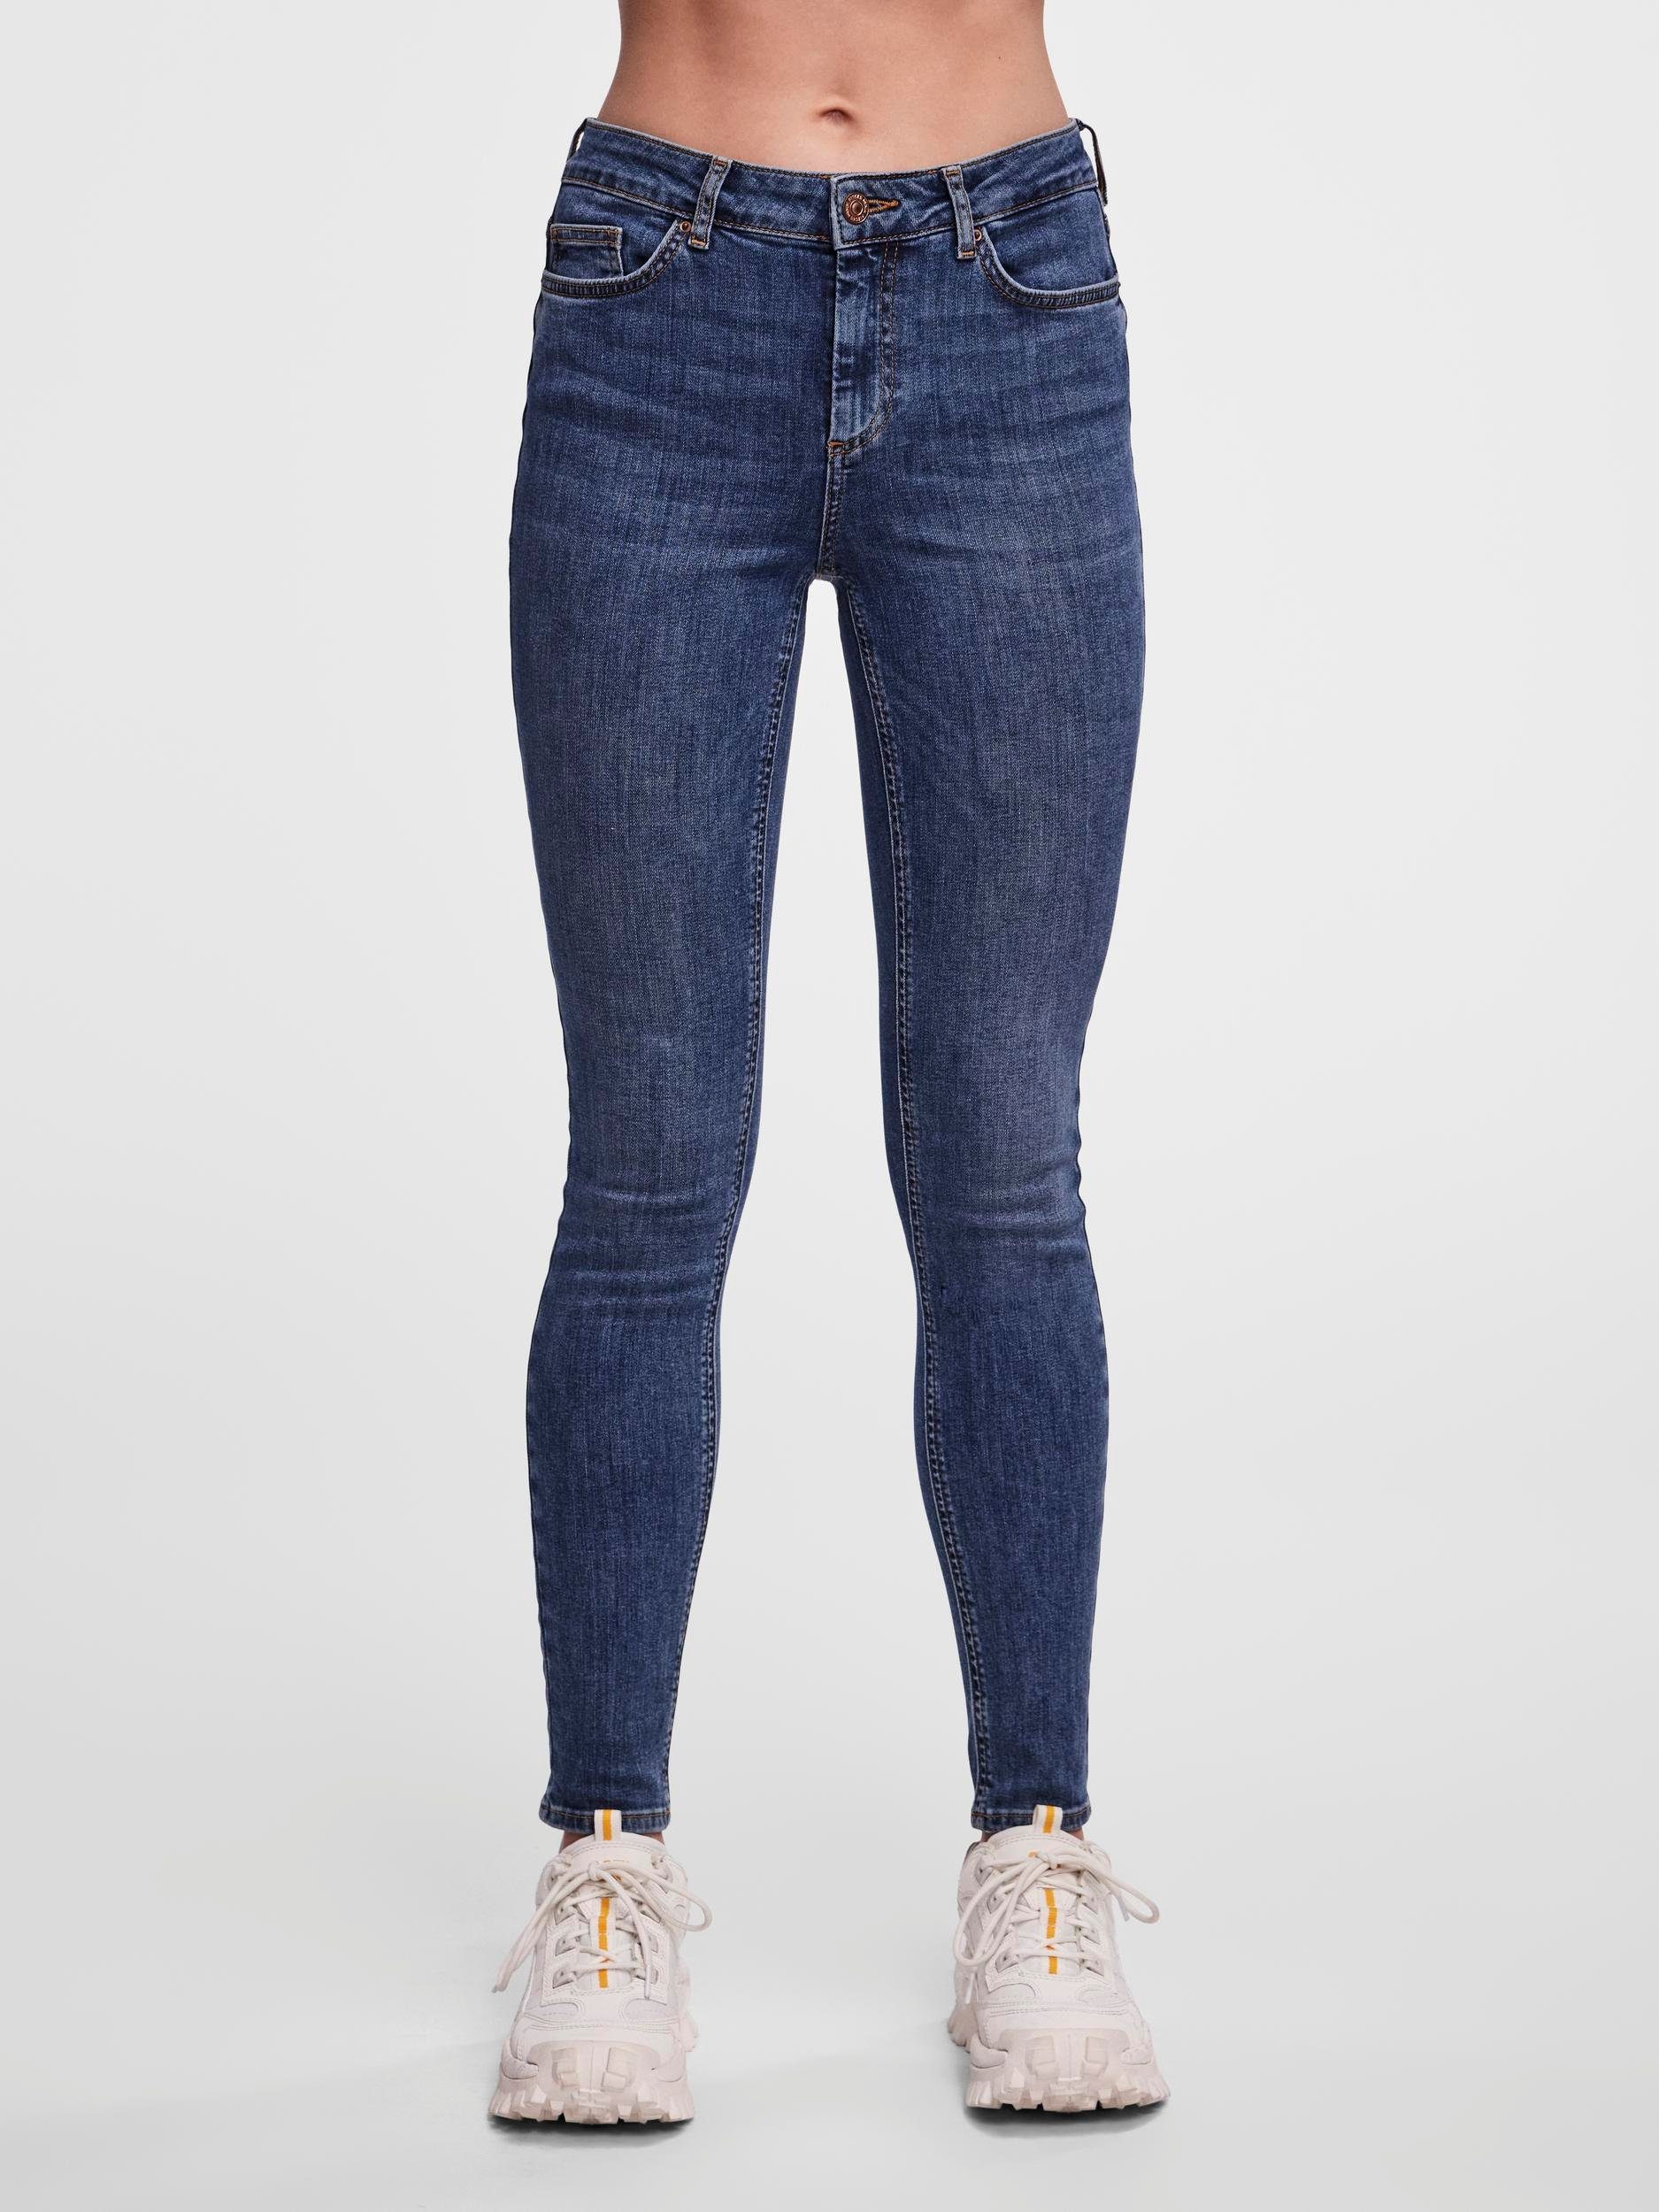 Pieces Skinny fit jeans PCDELLY SKN MW MB184 NOOS BC